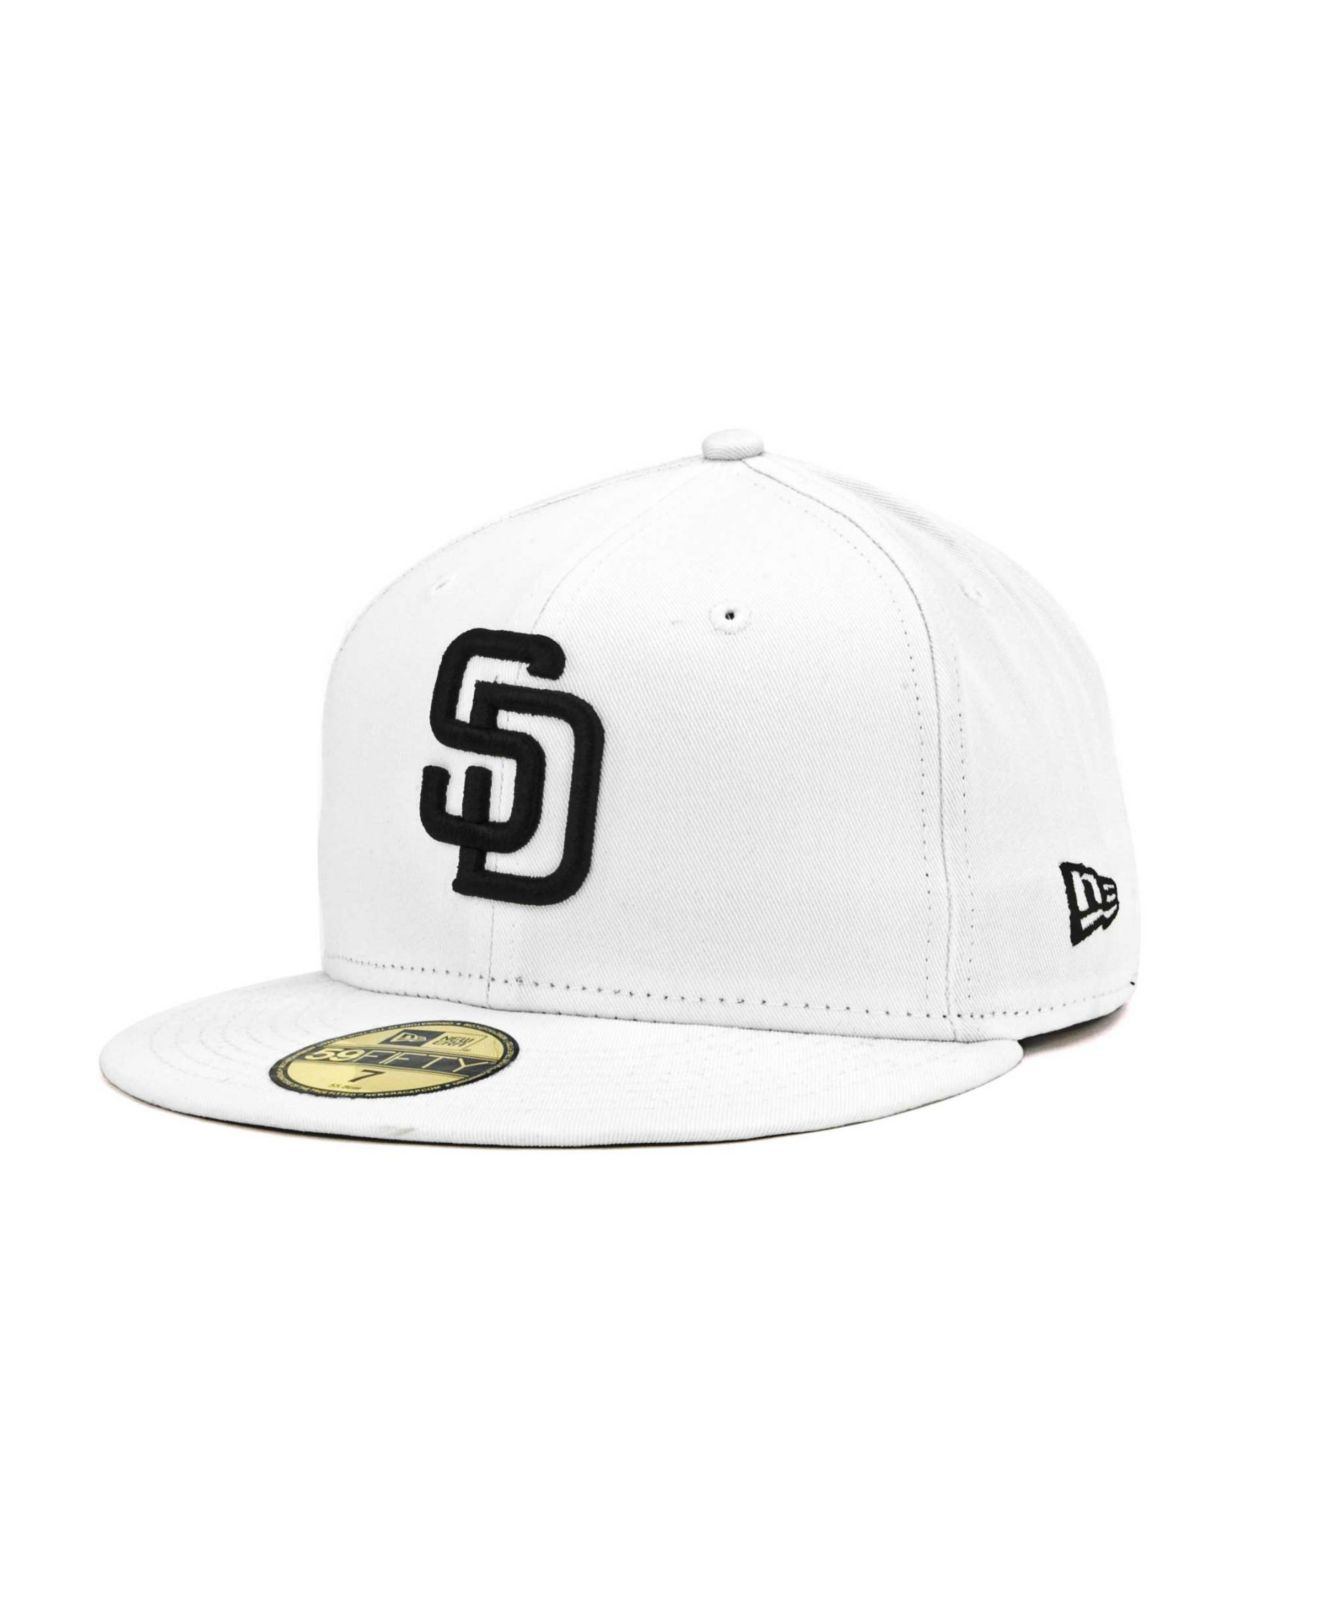 KTZ San Diego Padres Mlb White And Black 59fifty Cap for Men